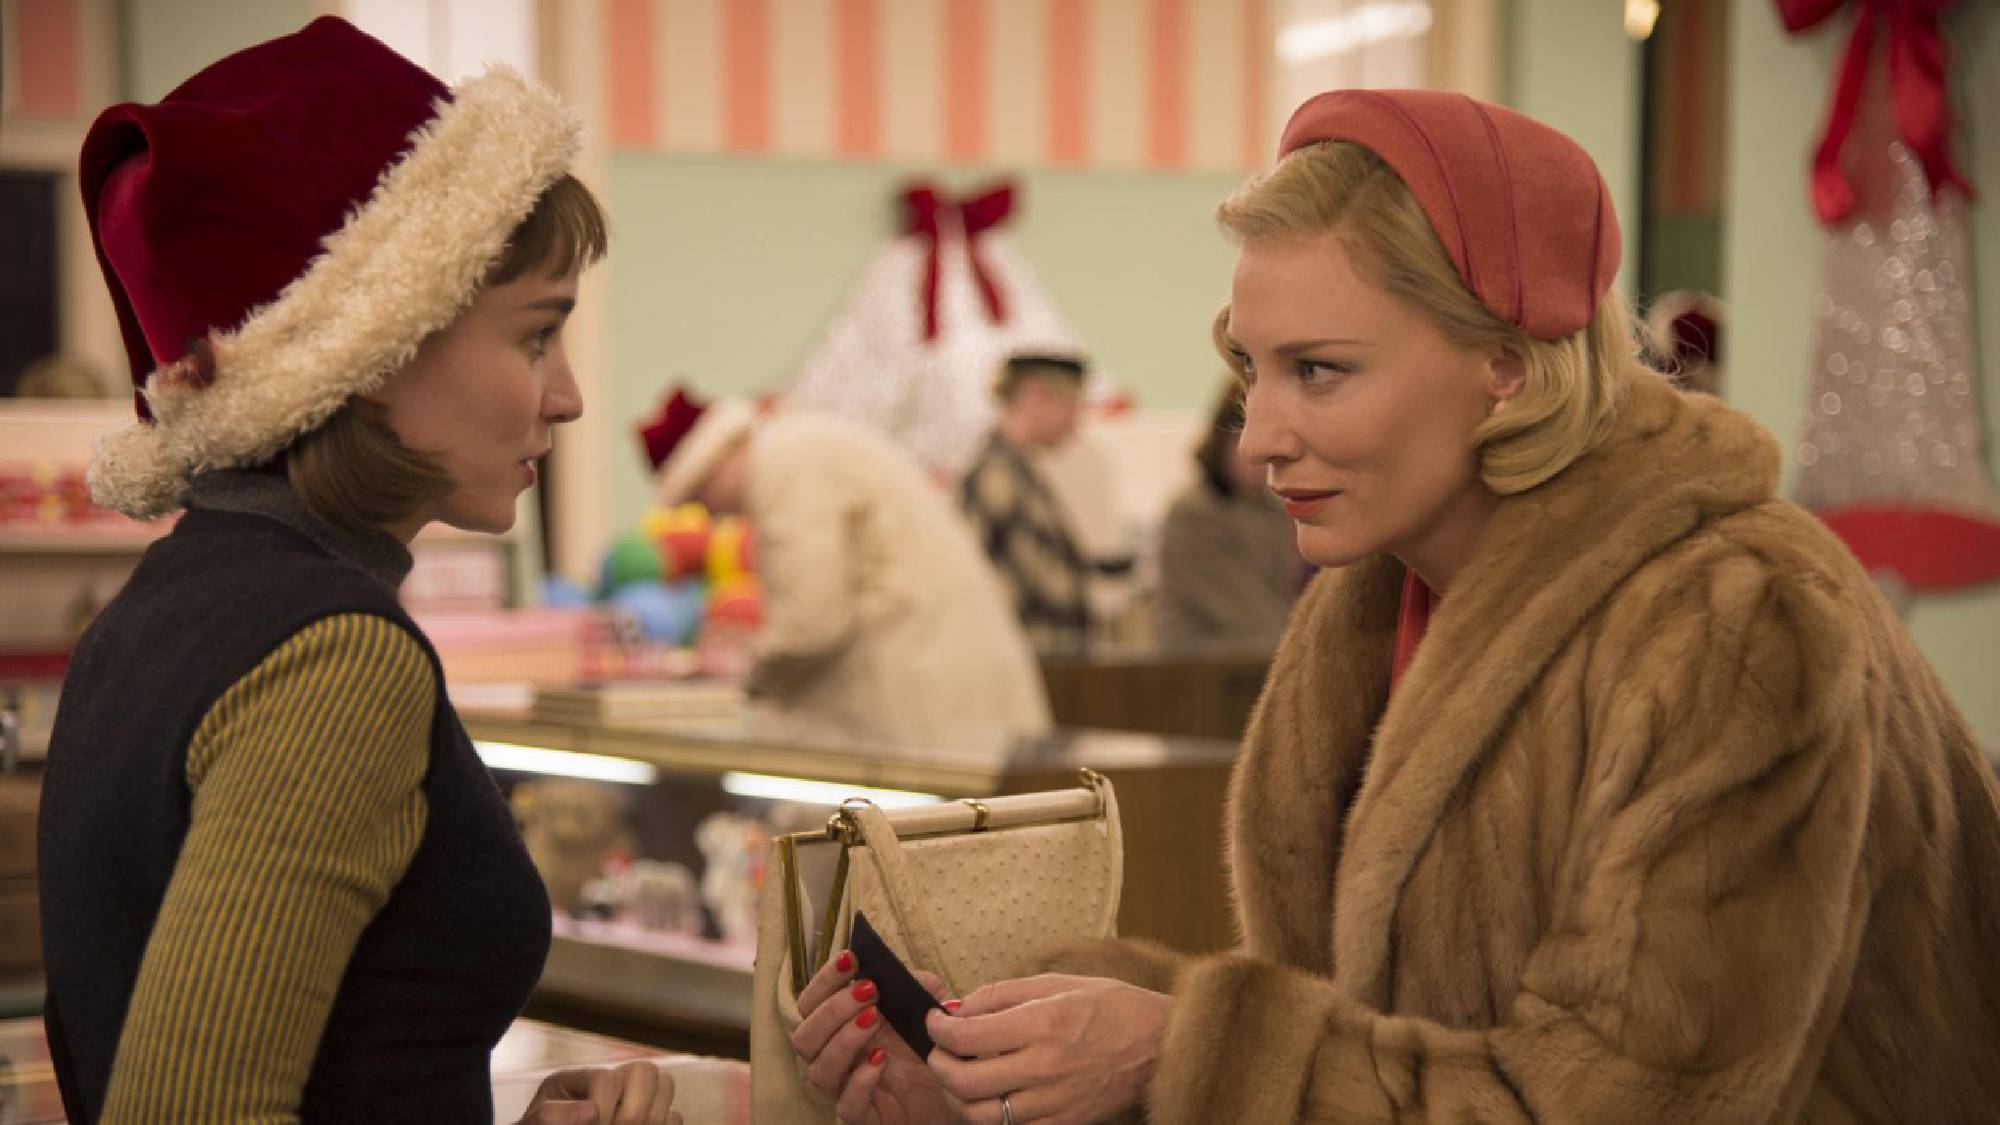 (L-R) Rooney Mara as Therese Belivet and Cate Blanchett as Carol Aird in Carol